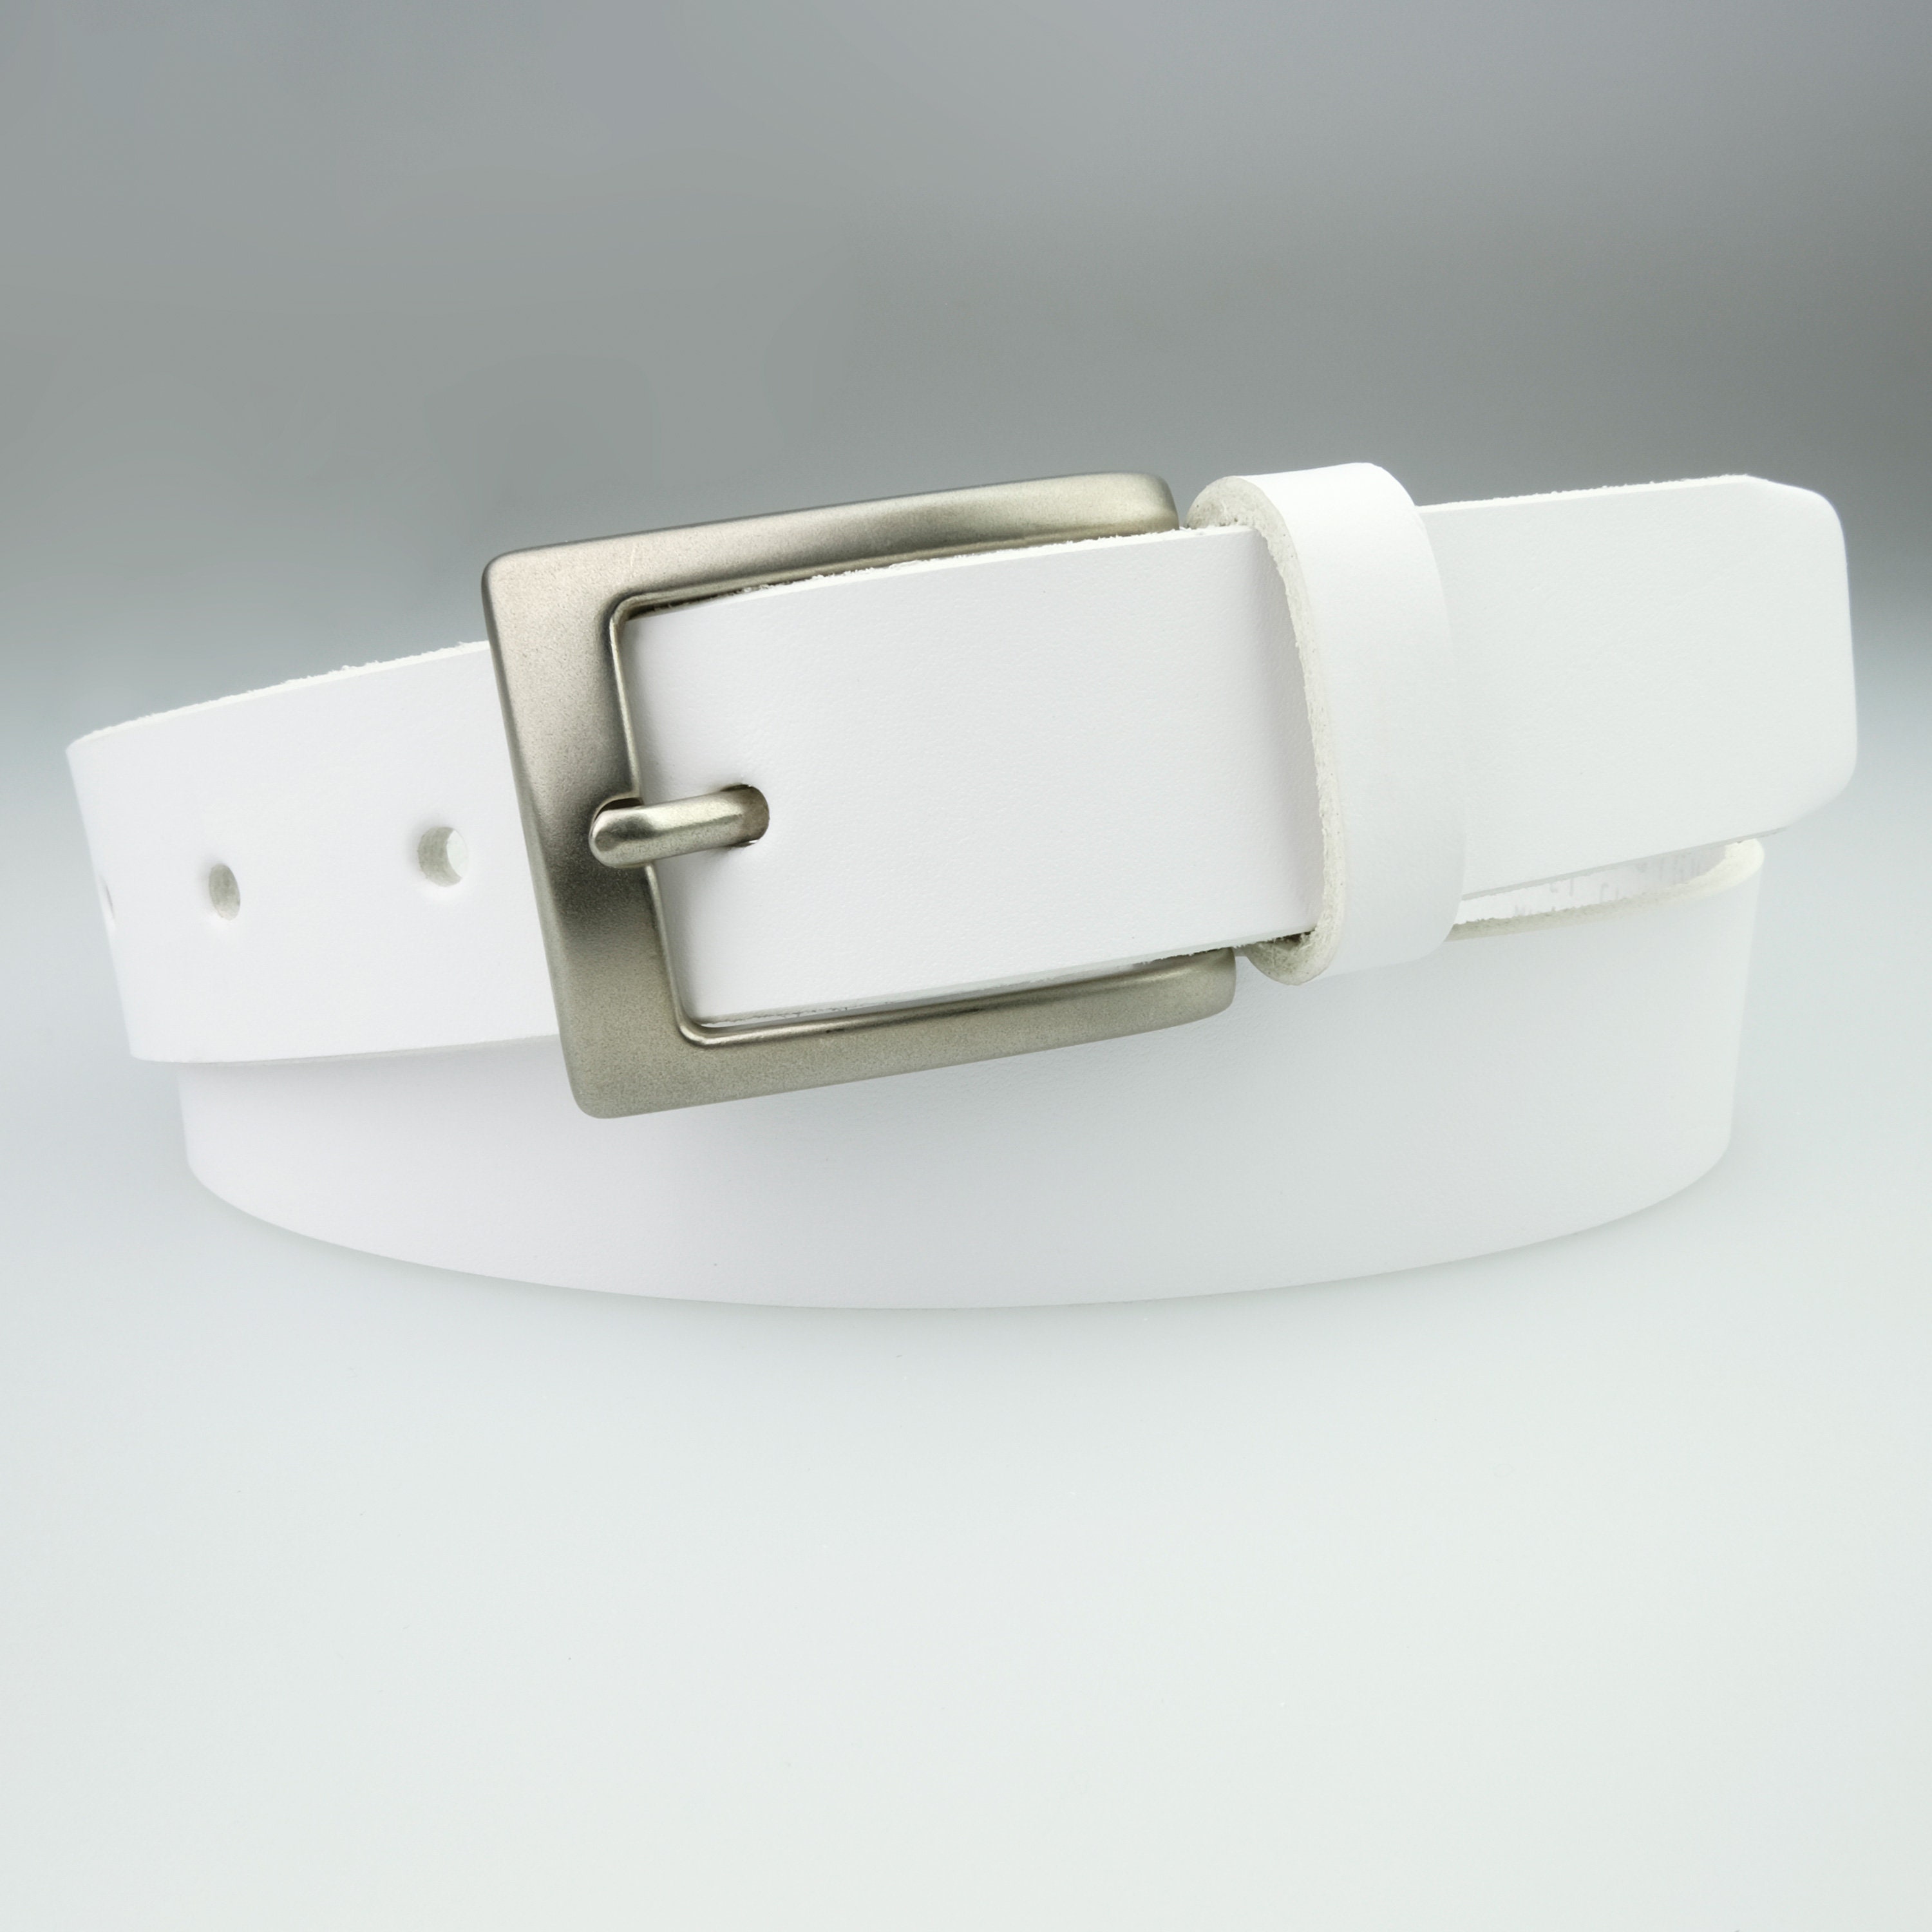 Shop for Stylist belts Online at Best Prices